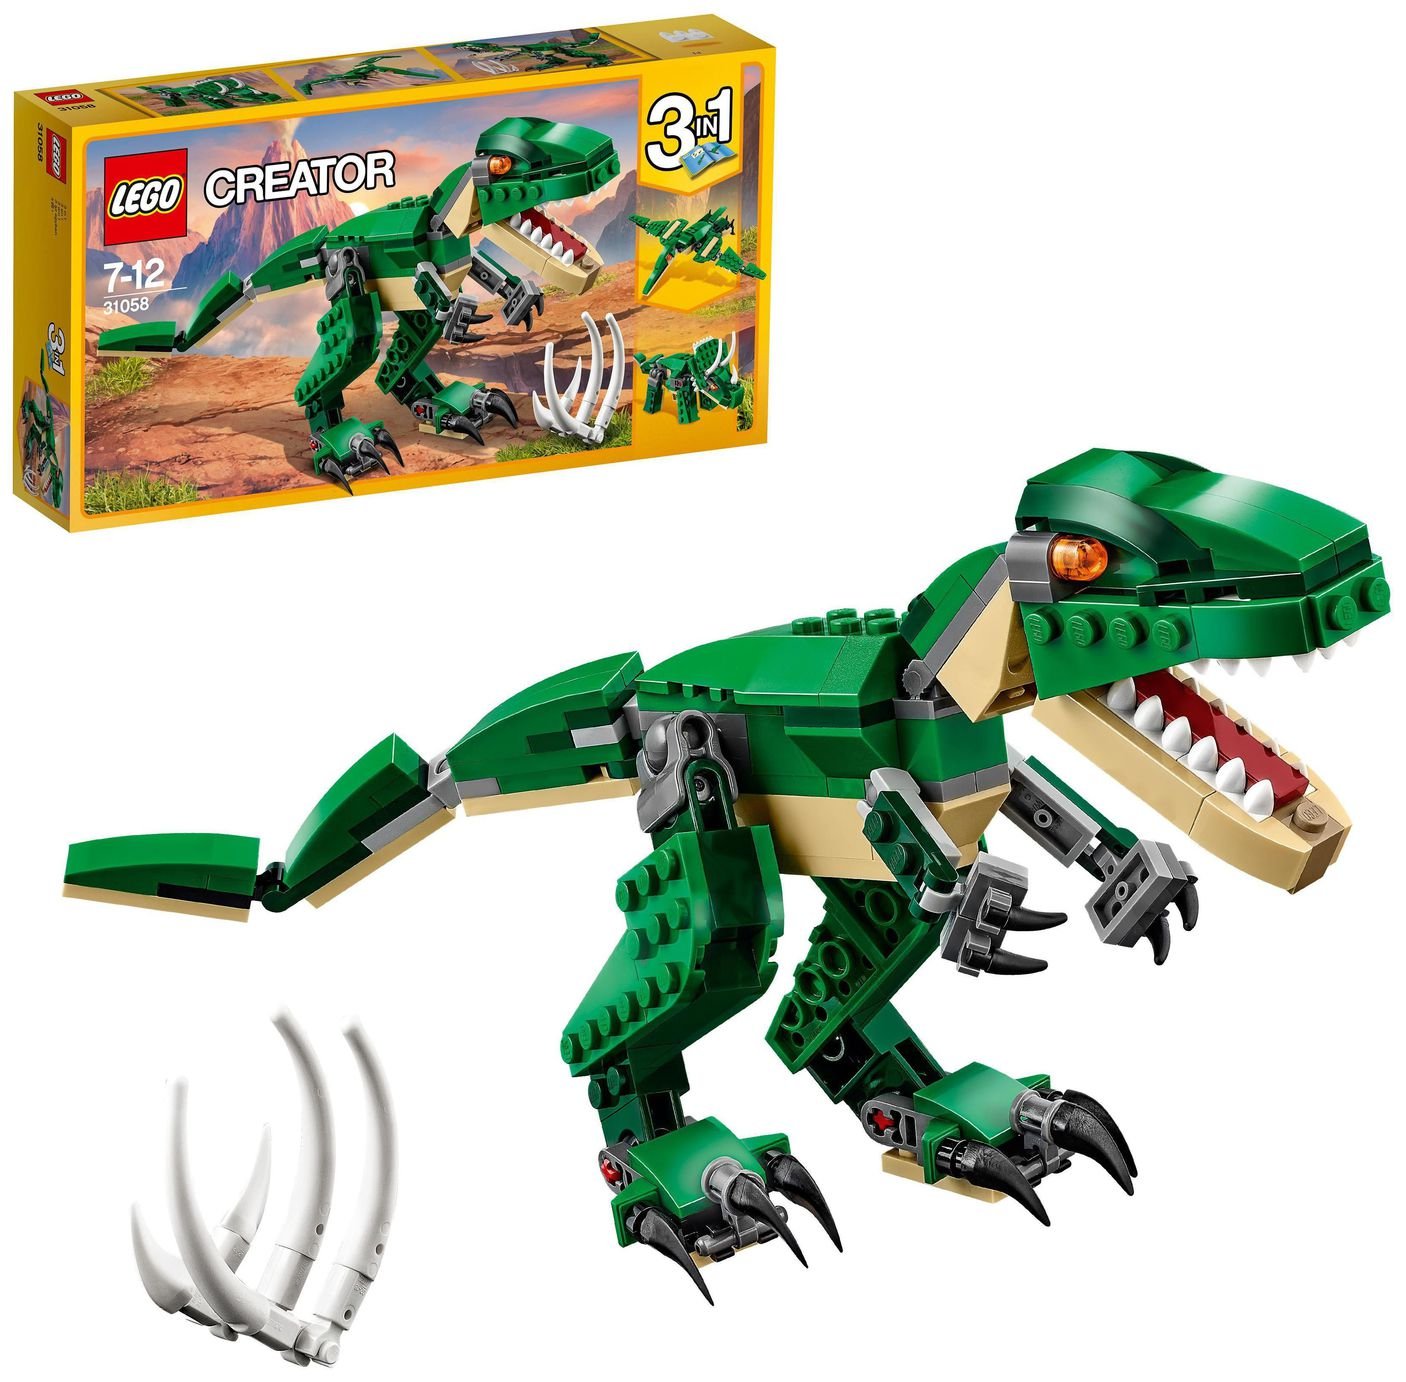 LEGO Creator 3 in 1 Mighty Dinosaurs Building Set 31058